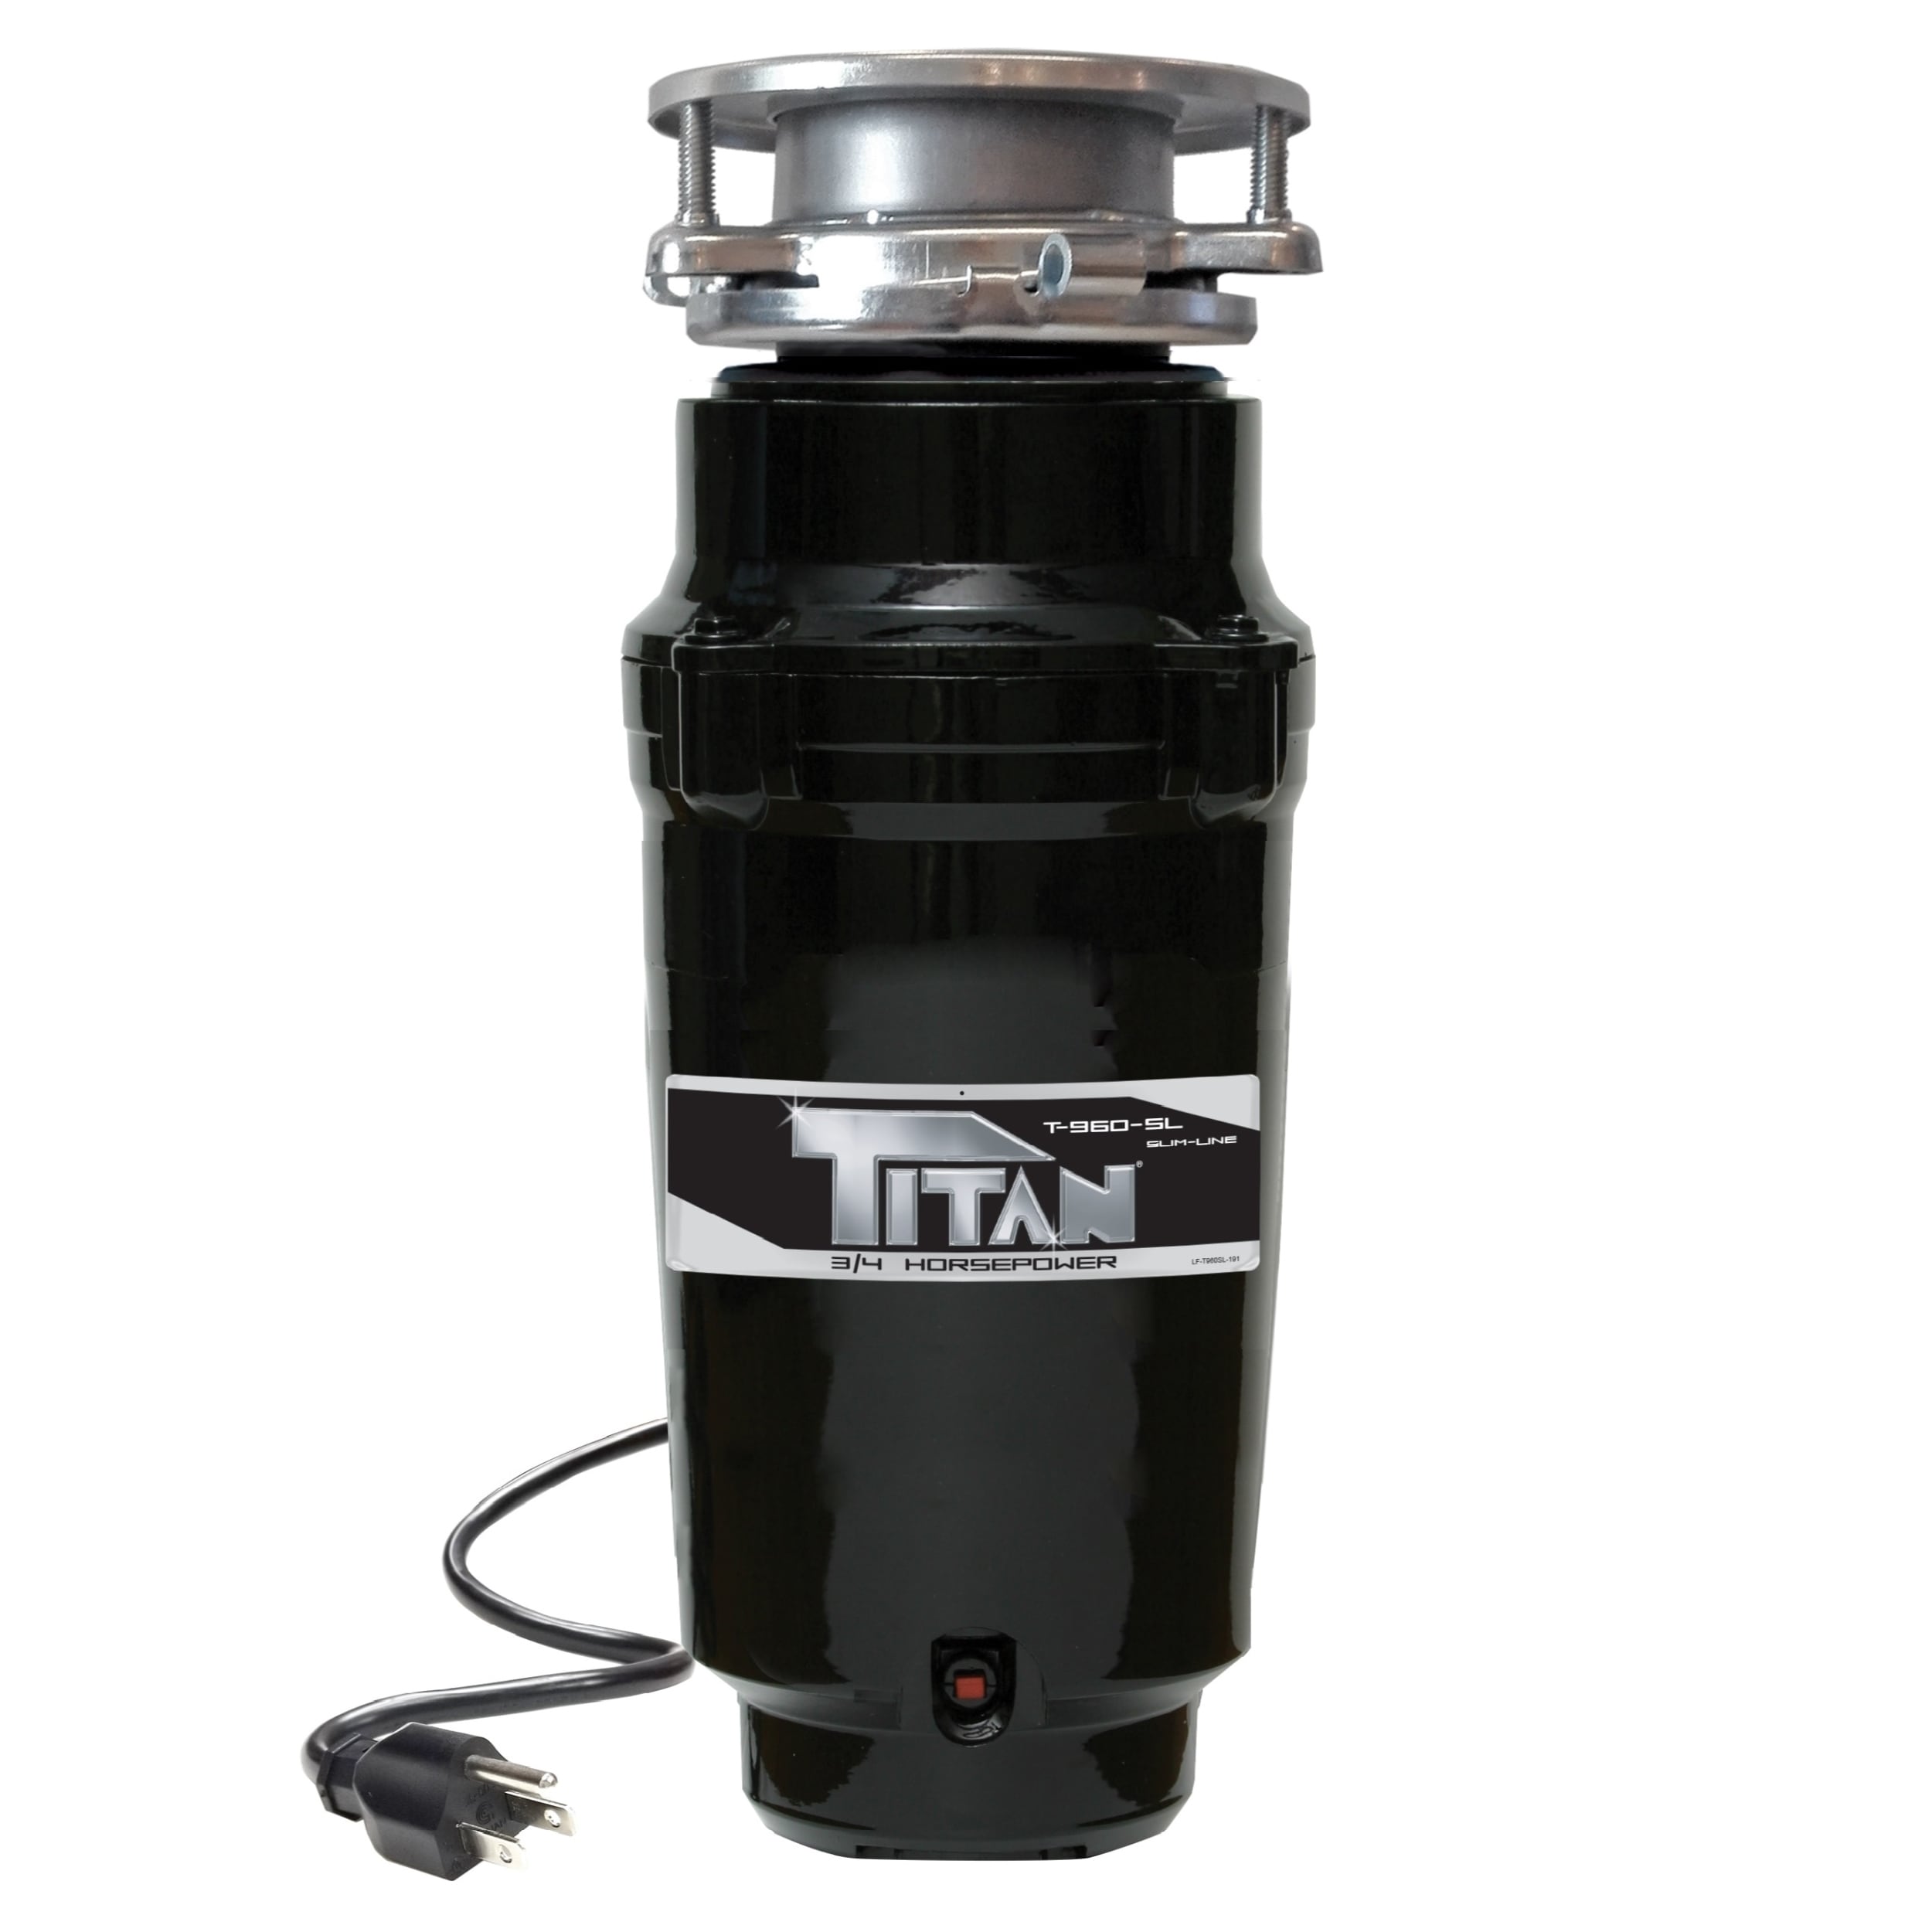 Titan 3/4 HP Slim-Line Garbage Disposal with Compact Design and Attached  Power Cord 3/4 hp On Sale Bed Bath  Beyond 35723716